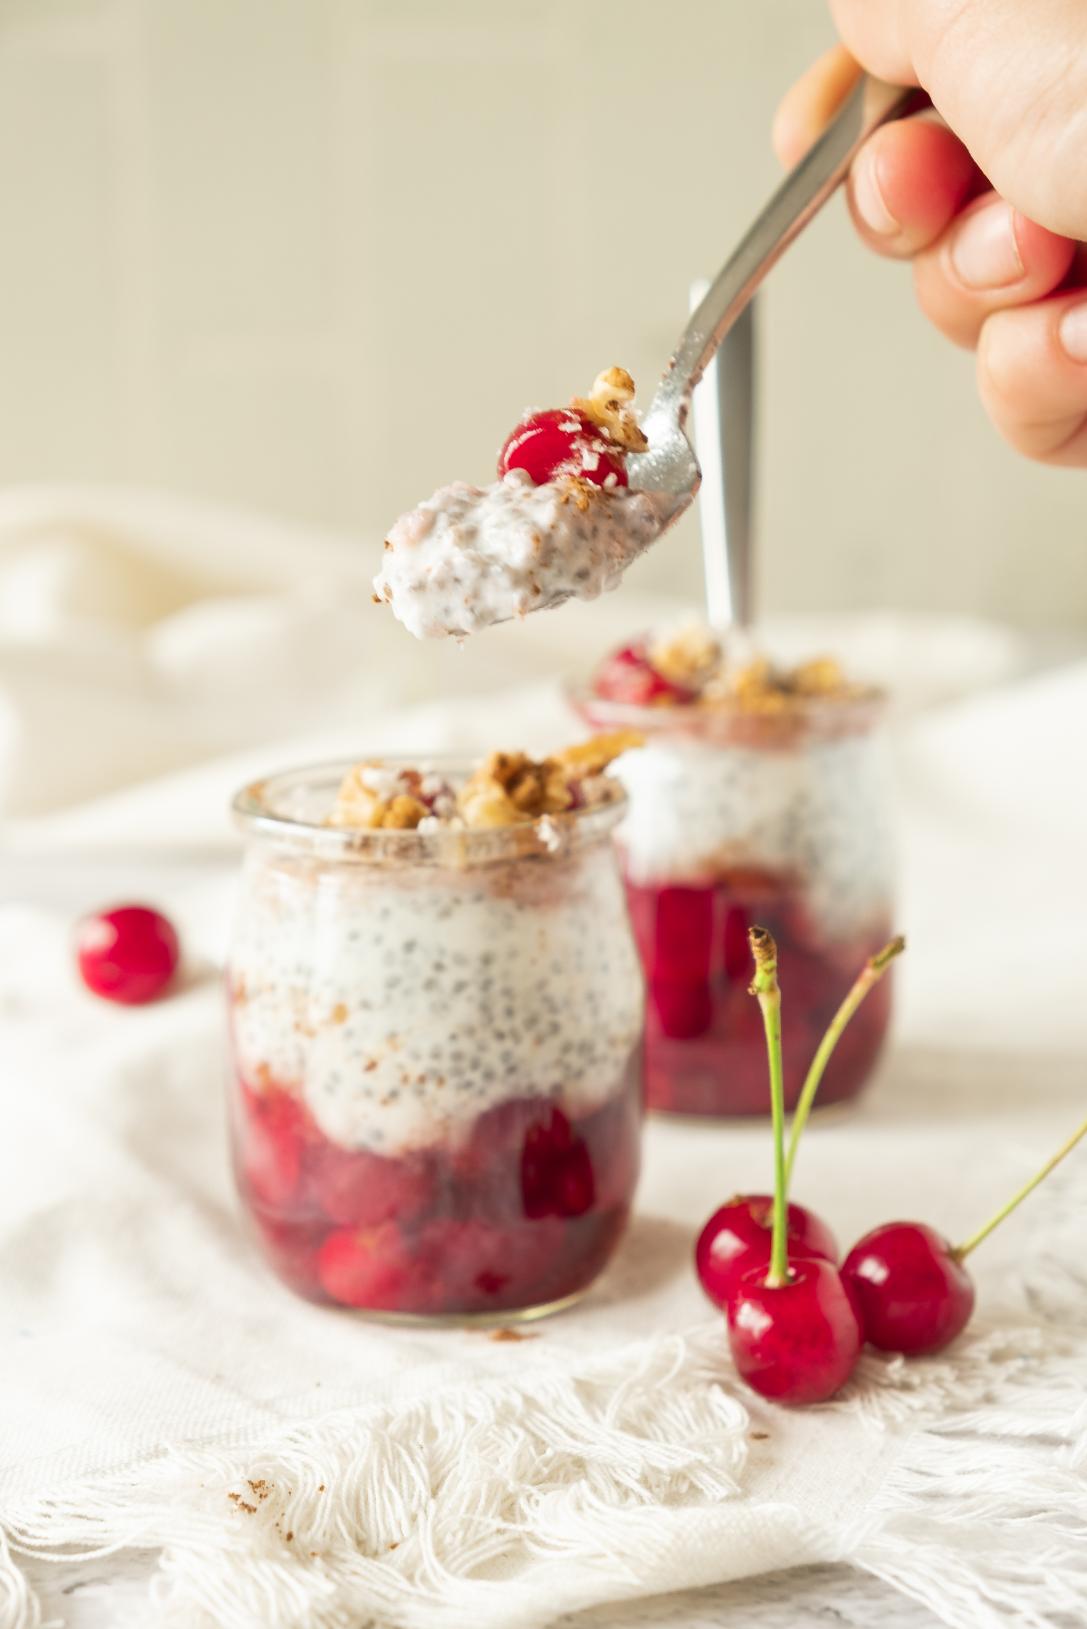 A hand holding a spoonful of creamy cherry chia pudding layered with vibrant red cherries and crunchy walnuts in a glass jar.